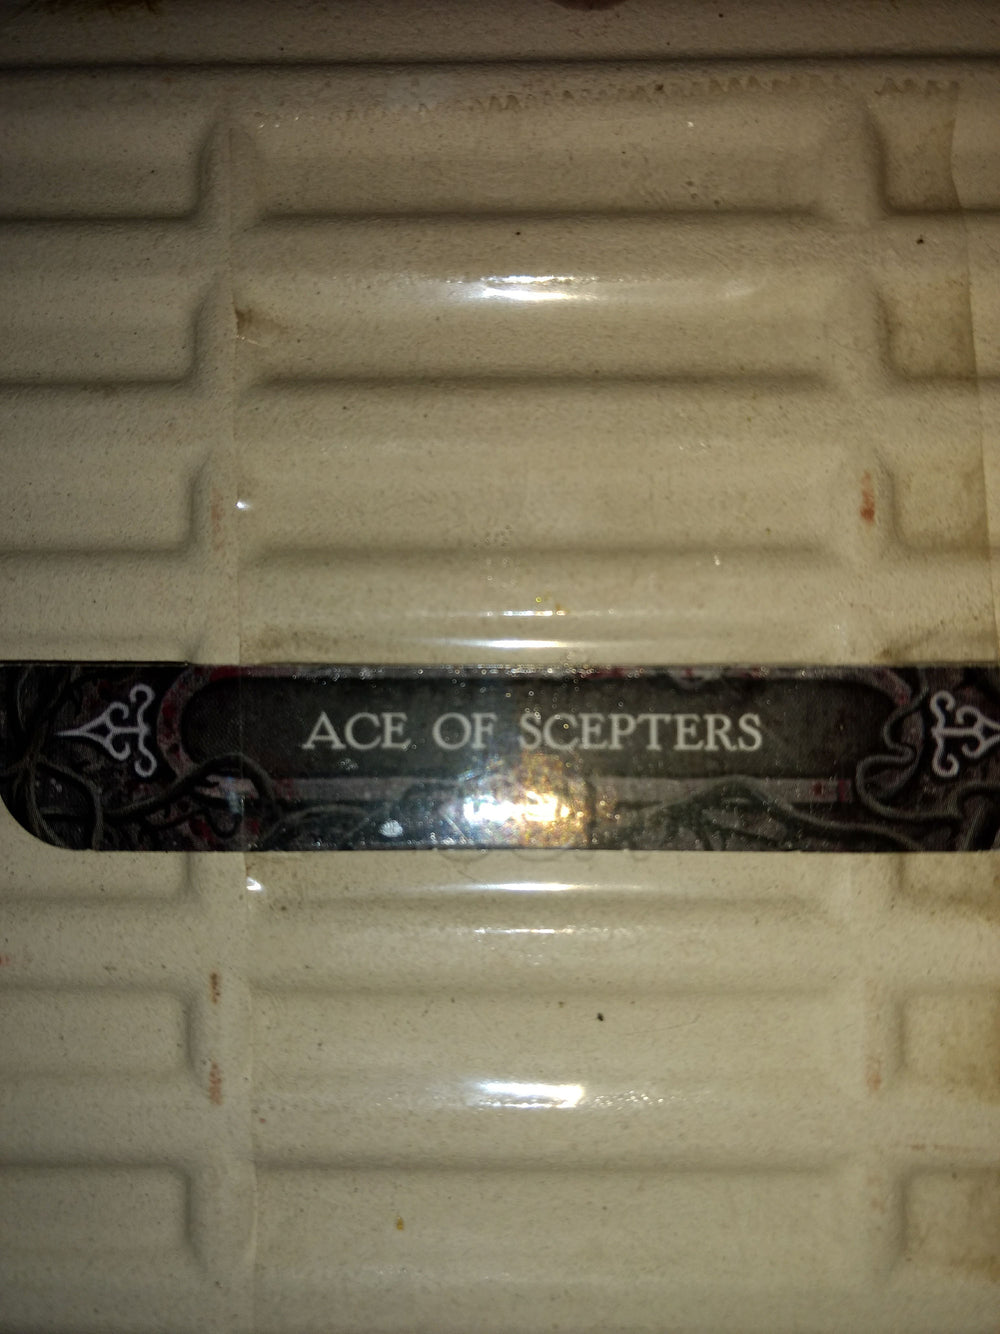 Ace of Scepters